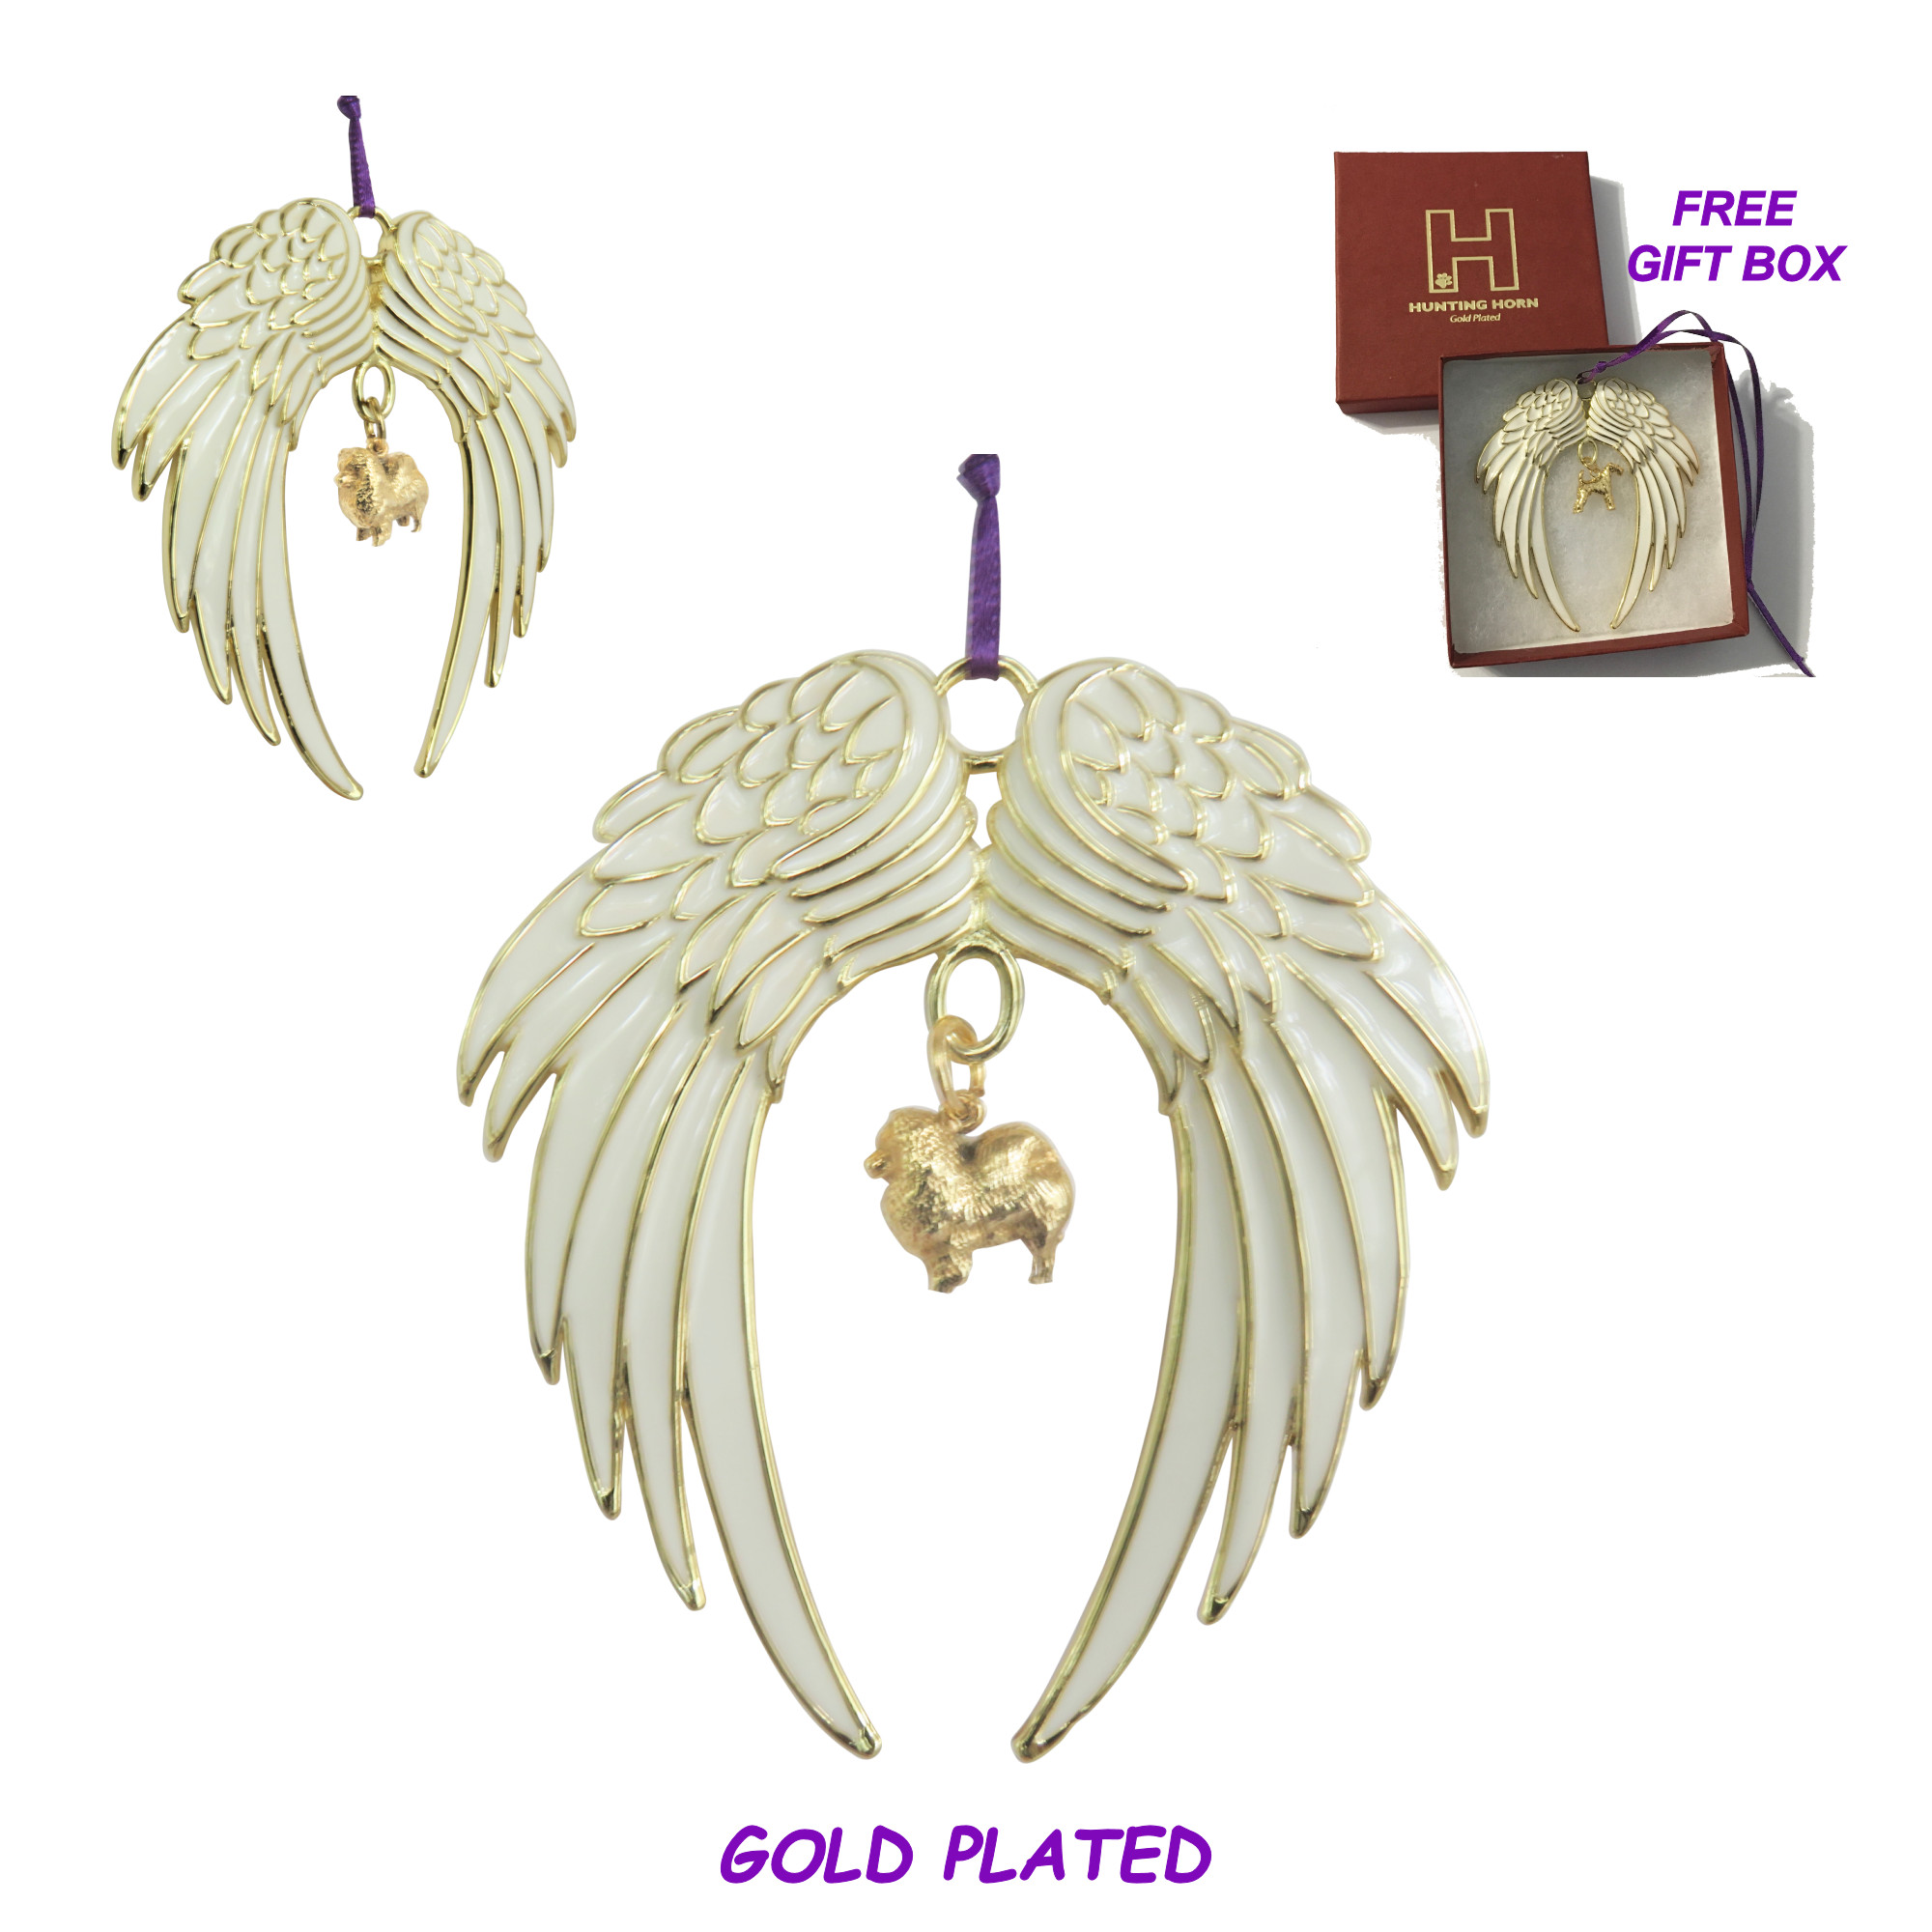 POMERANIAN Gold Plated ANGEL WING Memorial Christmas Holiday